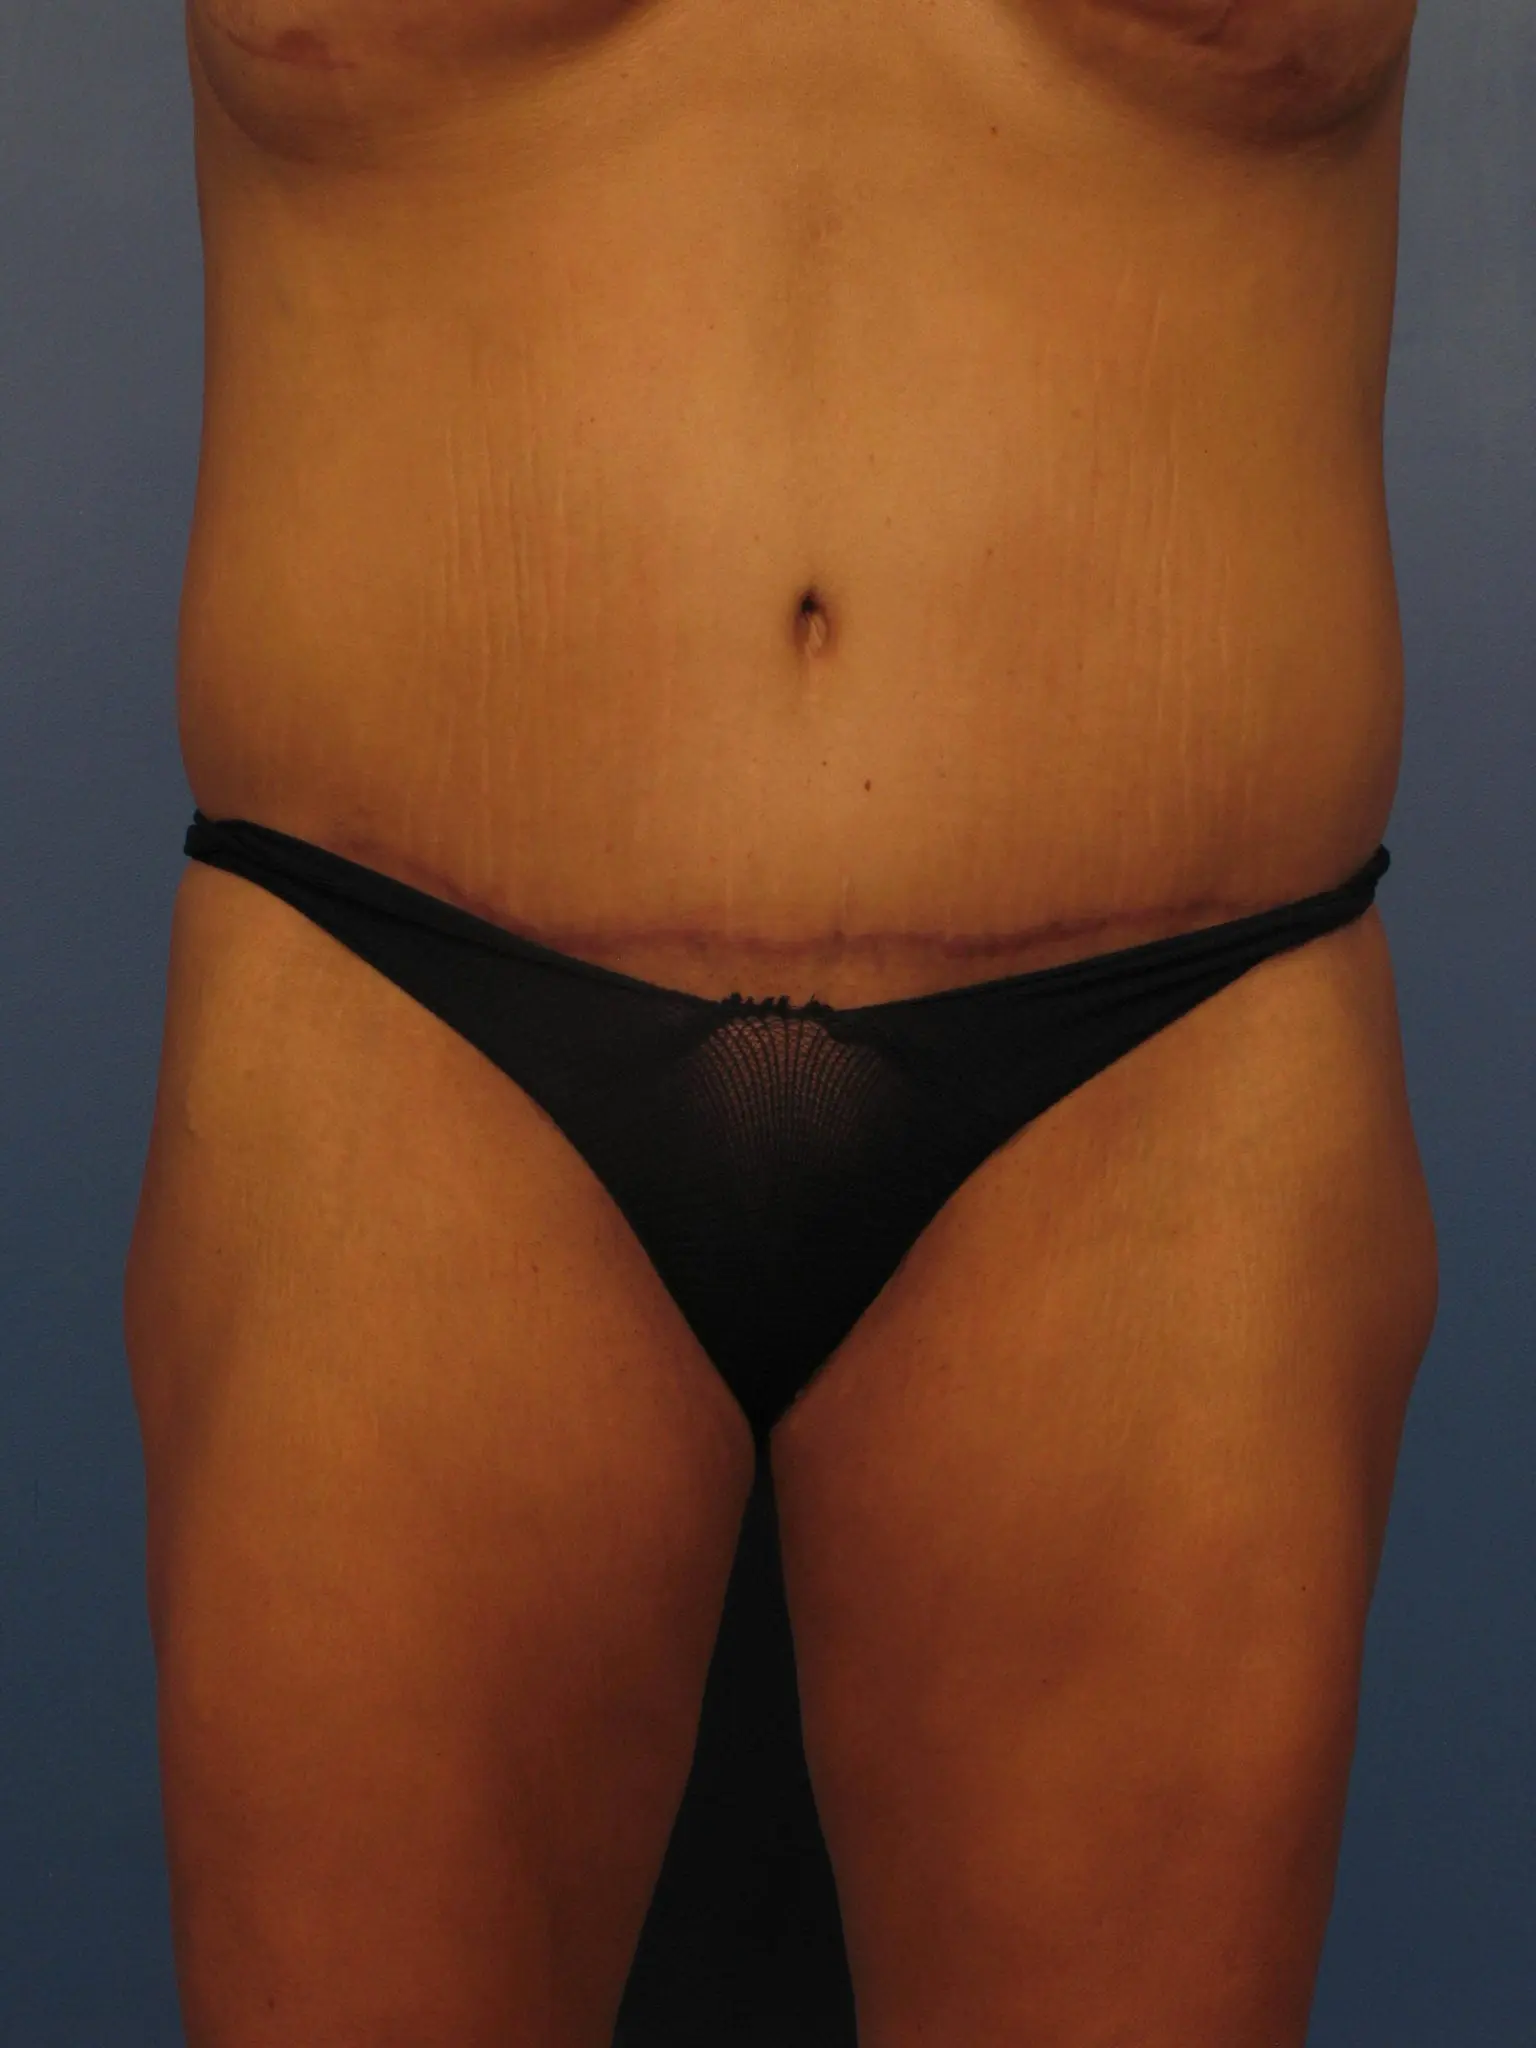 scar revision after tummy tuck